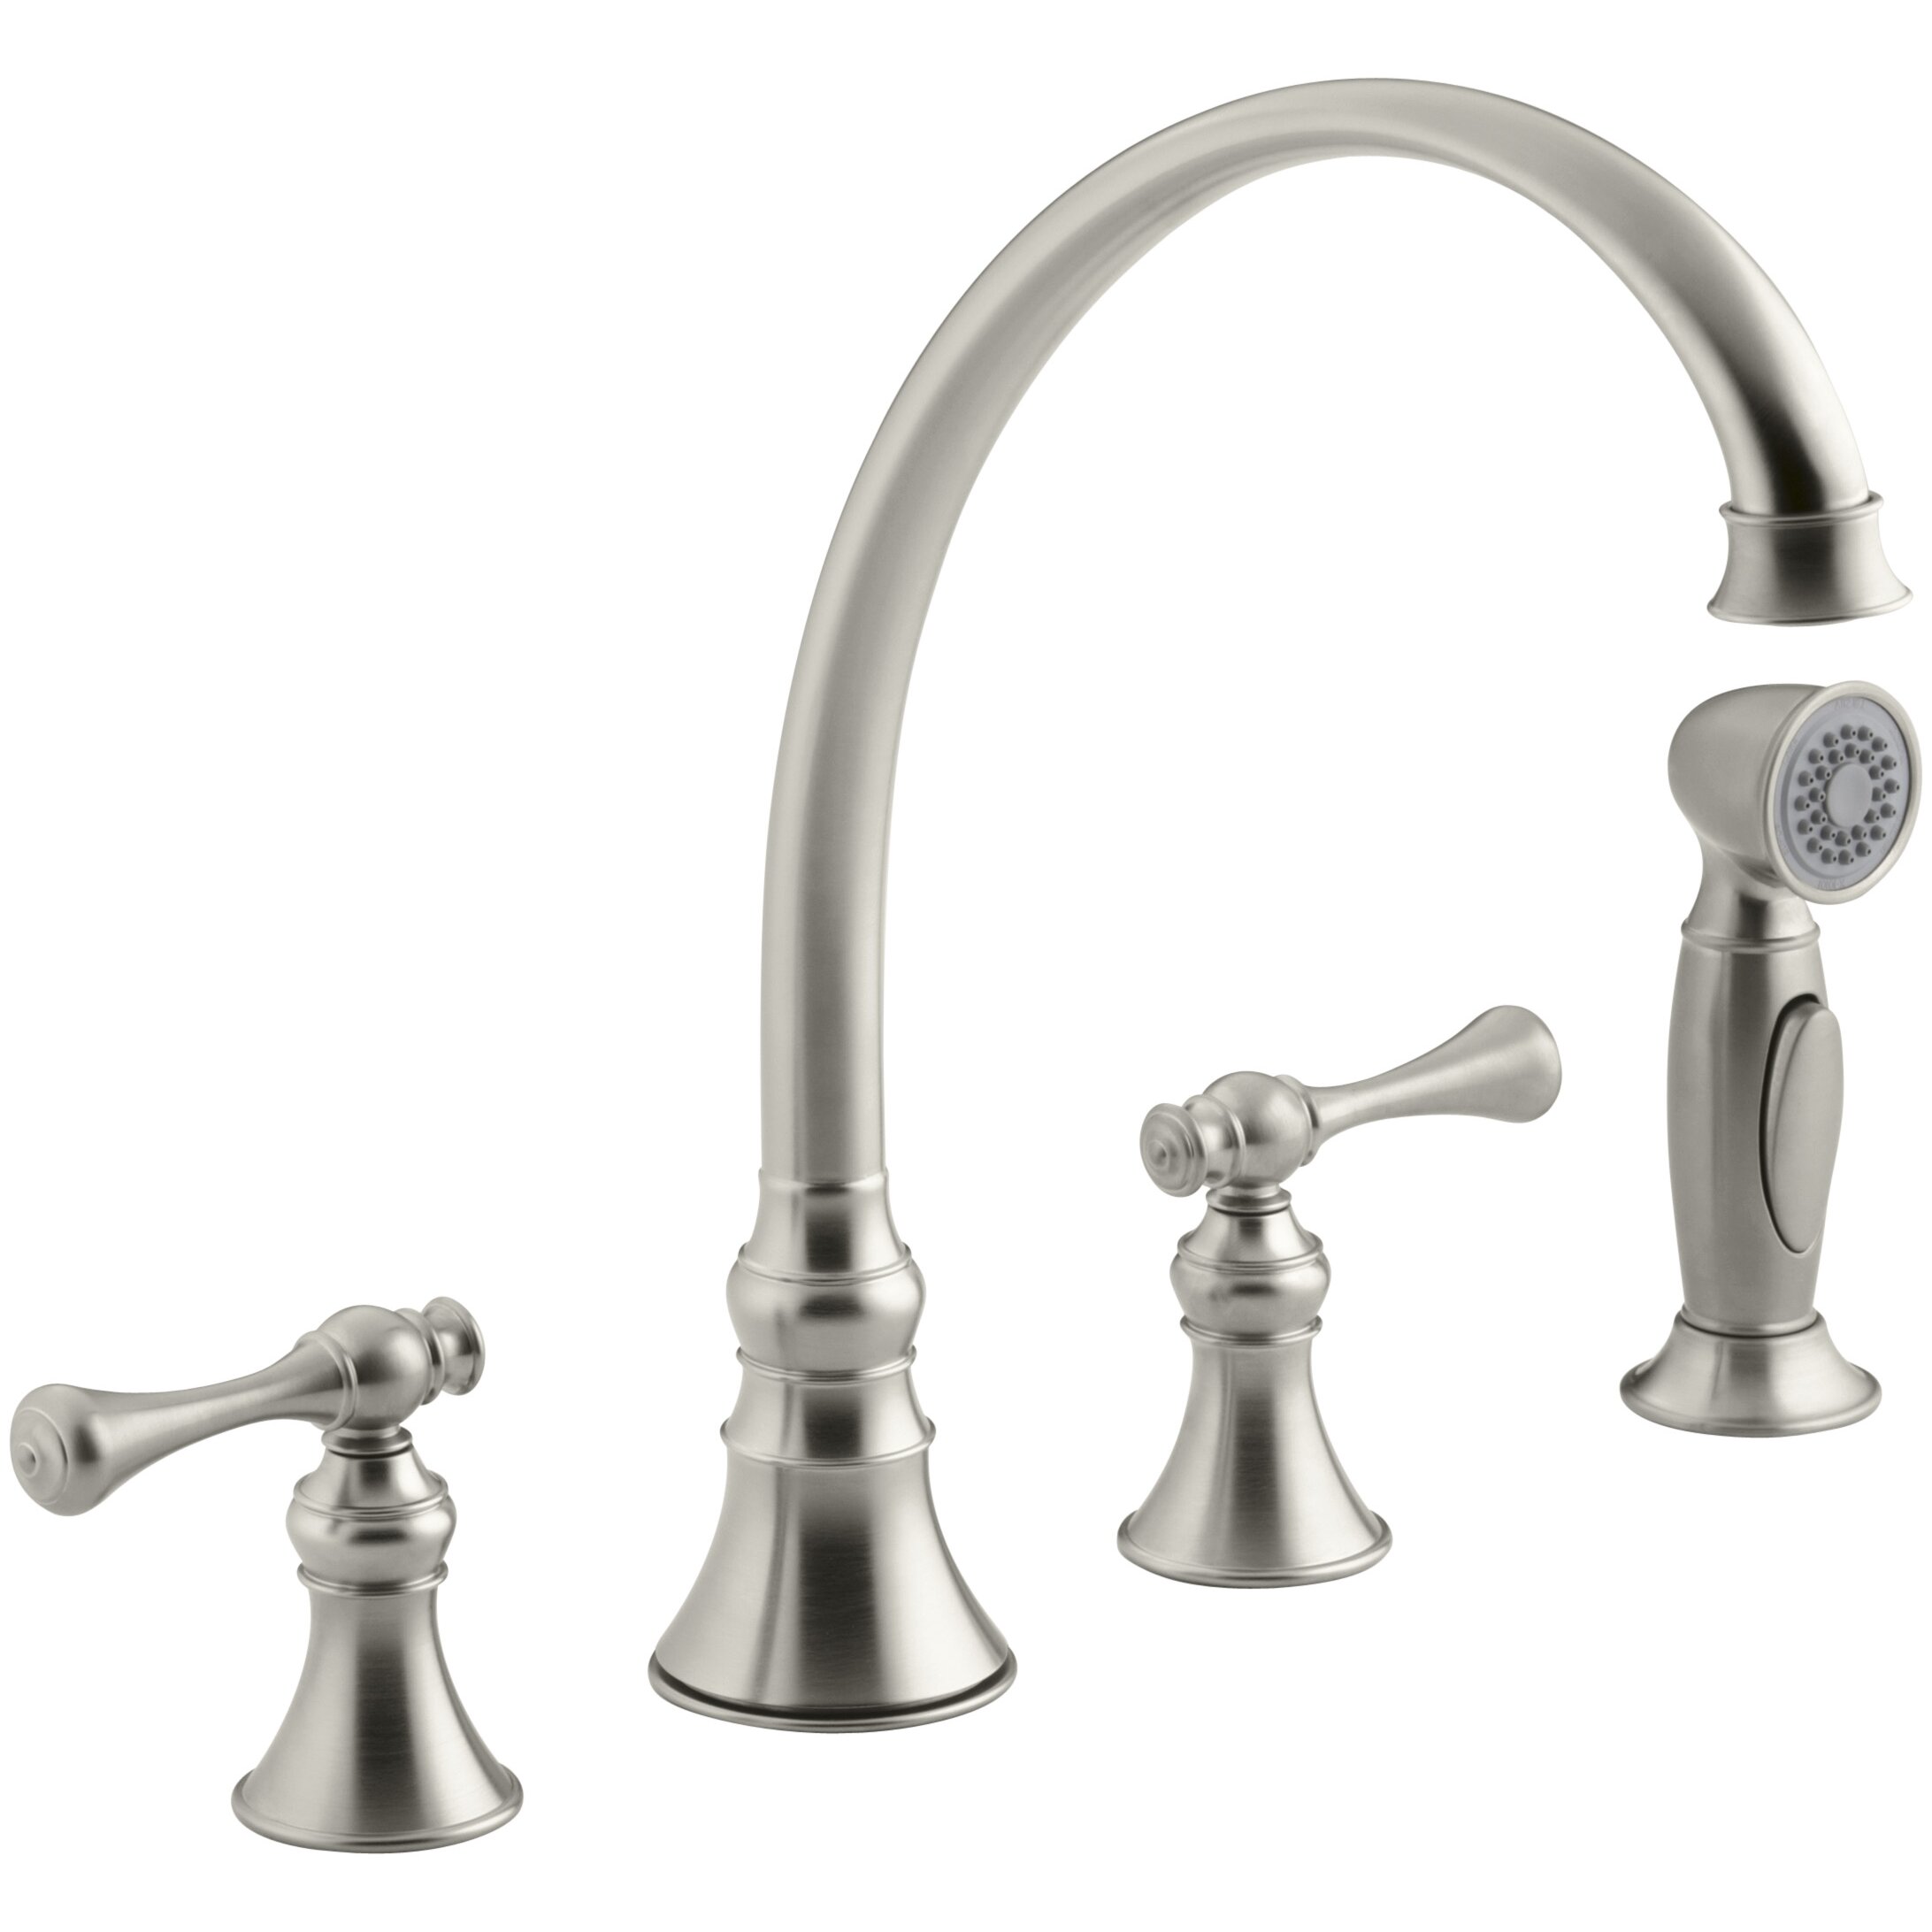 Kohler Revival Kitchen Faucet With 9 3 16 Spout Sidespray And Traditional Lever Handles 16109 4A 